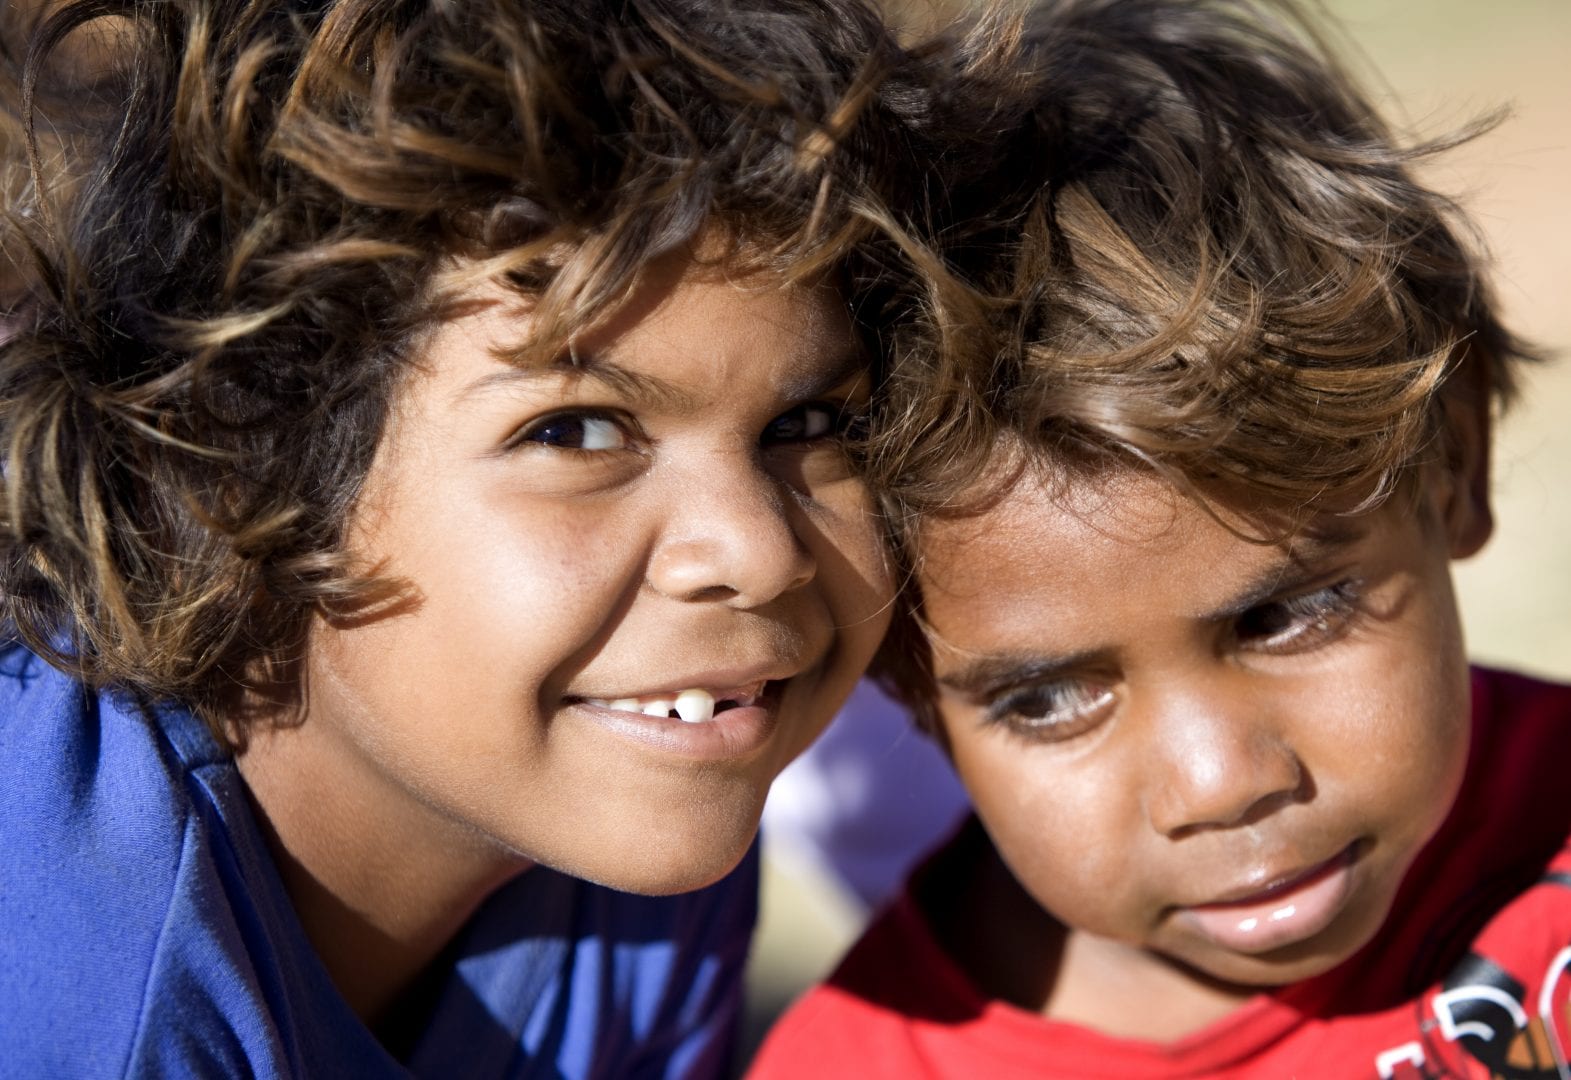 Two young Indigenous boys 